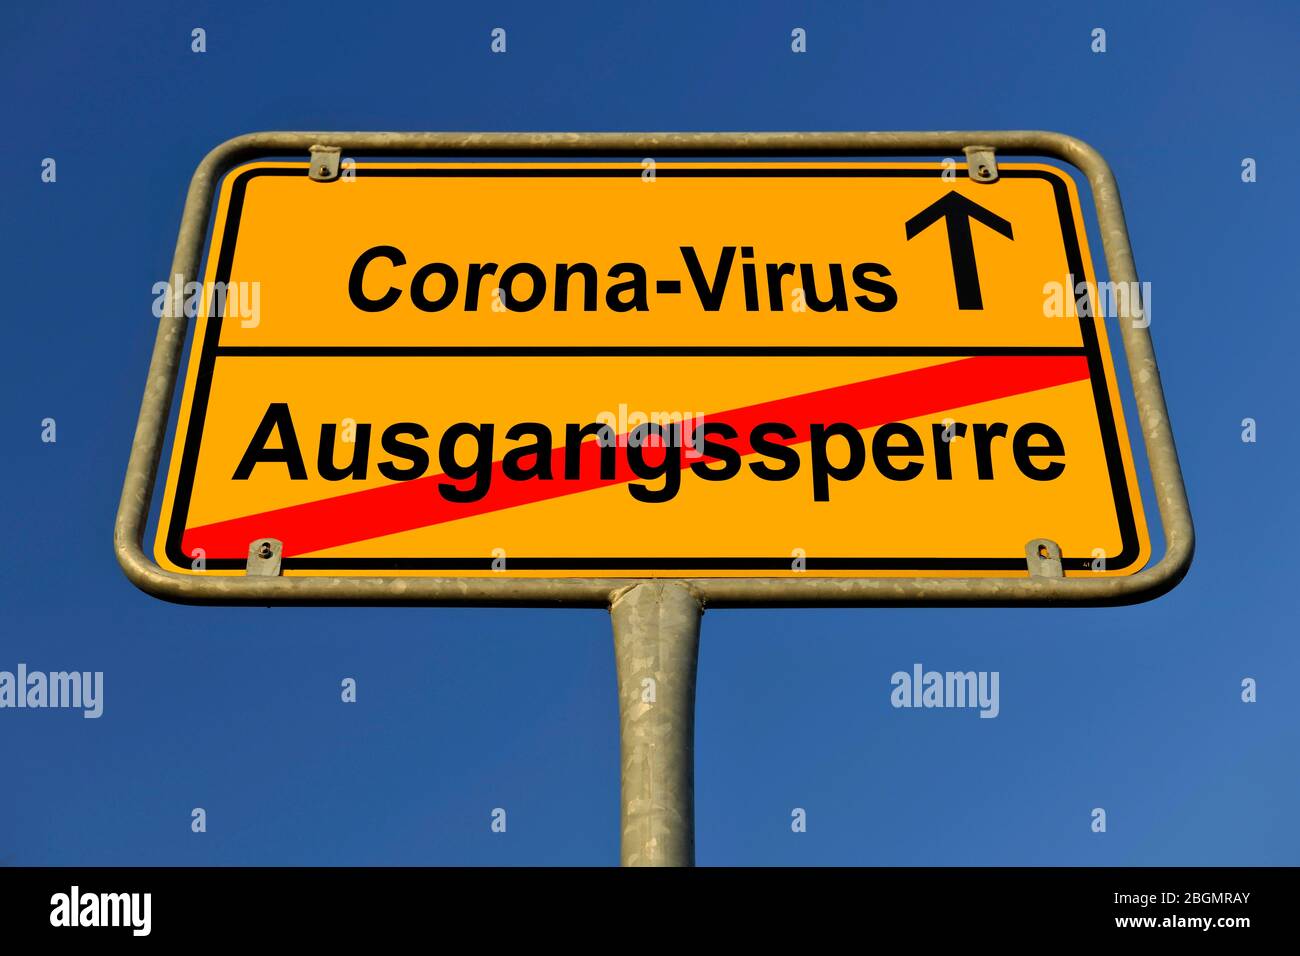 Digital Composing, symbolic image, place-name sign, lifting or easing of contact ban and curfew, Coronavirus, Covid-19, Germany Stock Photo